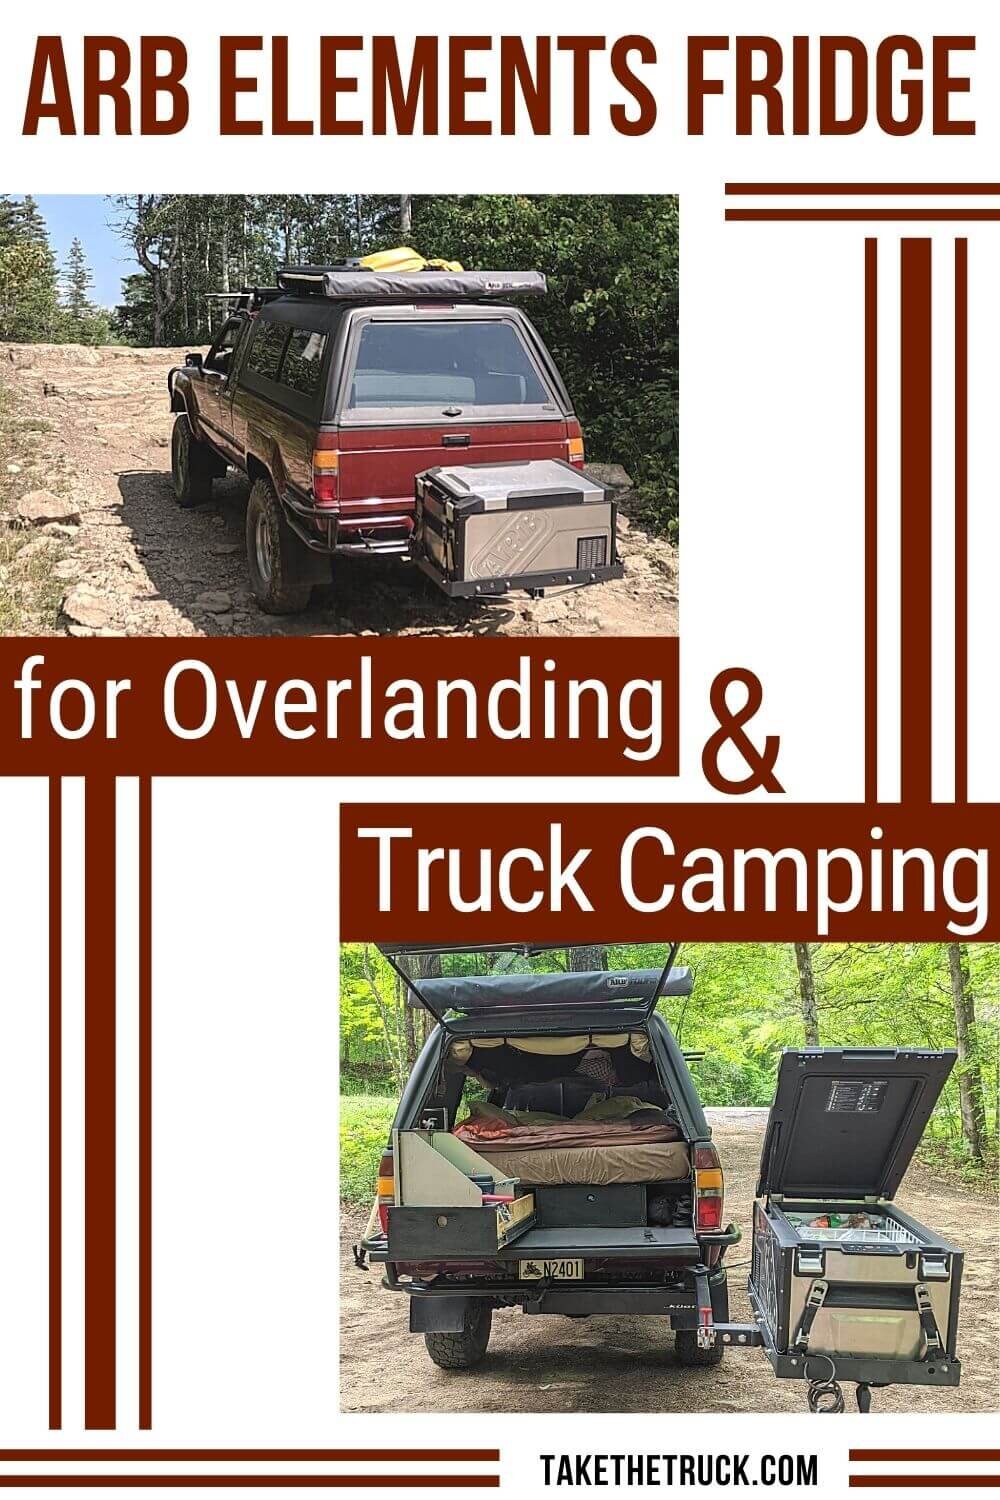 The ARB Elements Fridge is the best overland fridge and a great outdoor fridge for camping - read why the ARB Elements Fridge is a quality piece of gear for overlanding and camping..